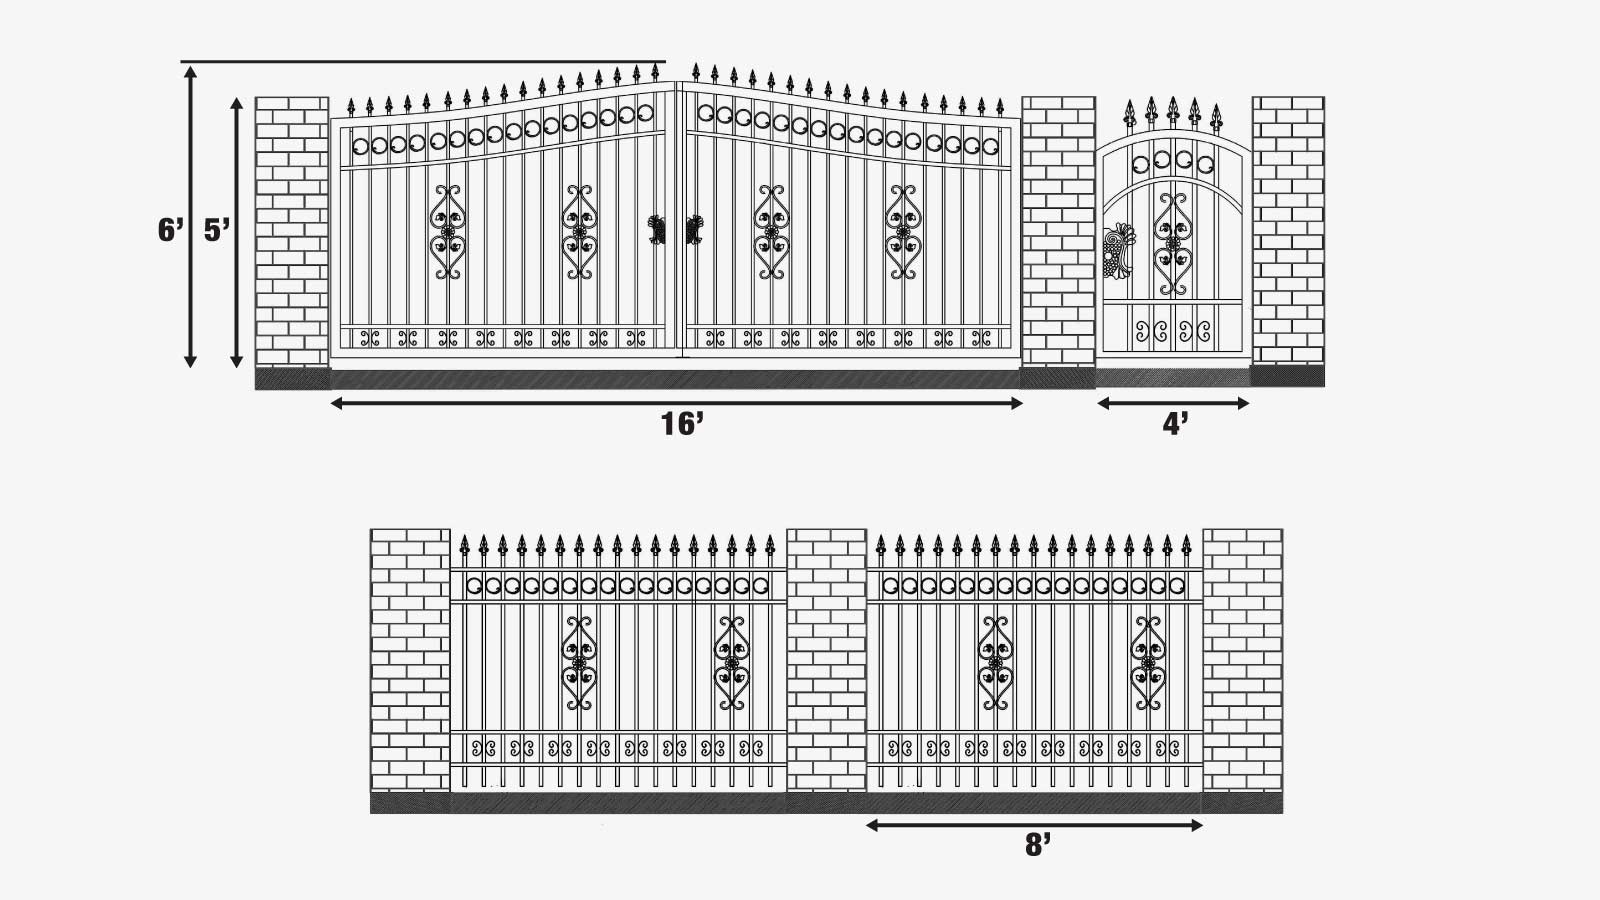 TMG Industrial 212-ft Bi-Parting Ornamental Wrought Iron Gate & Fence Panels Combo Pack, All Steel, Powder Coated, TMG-MG212P-specifications-image